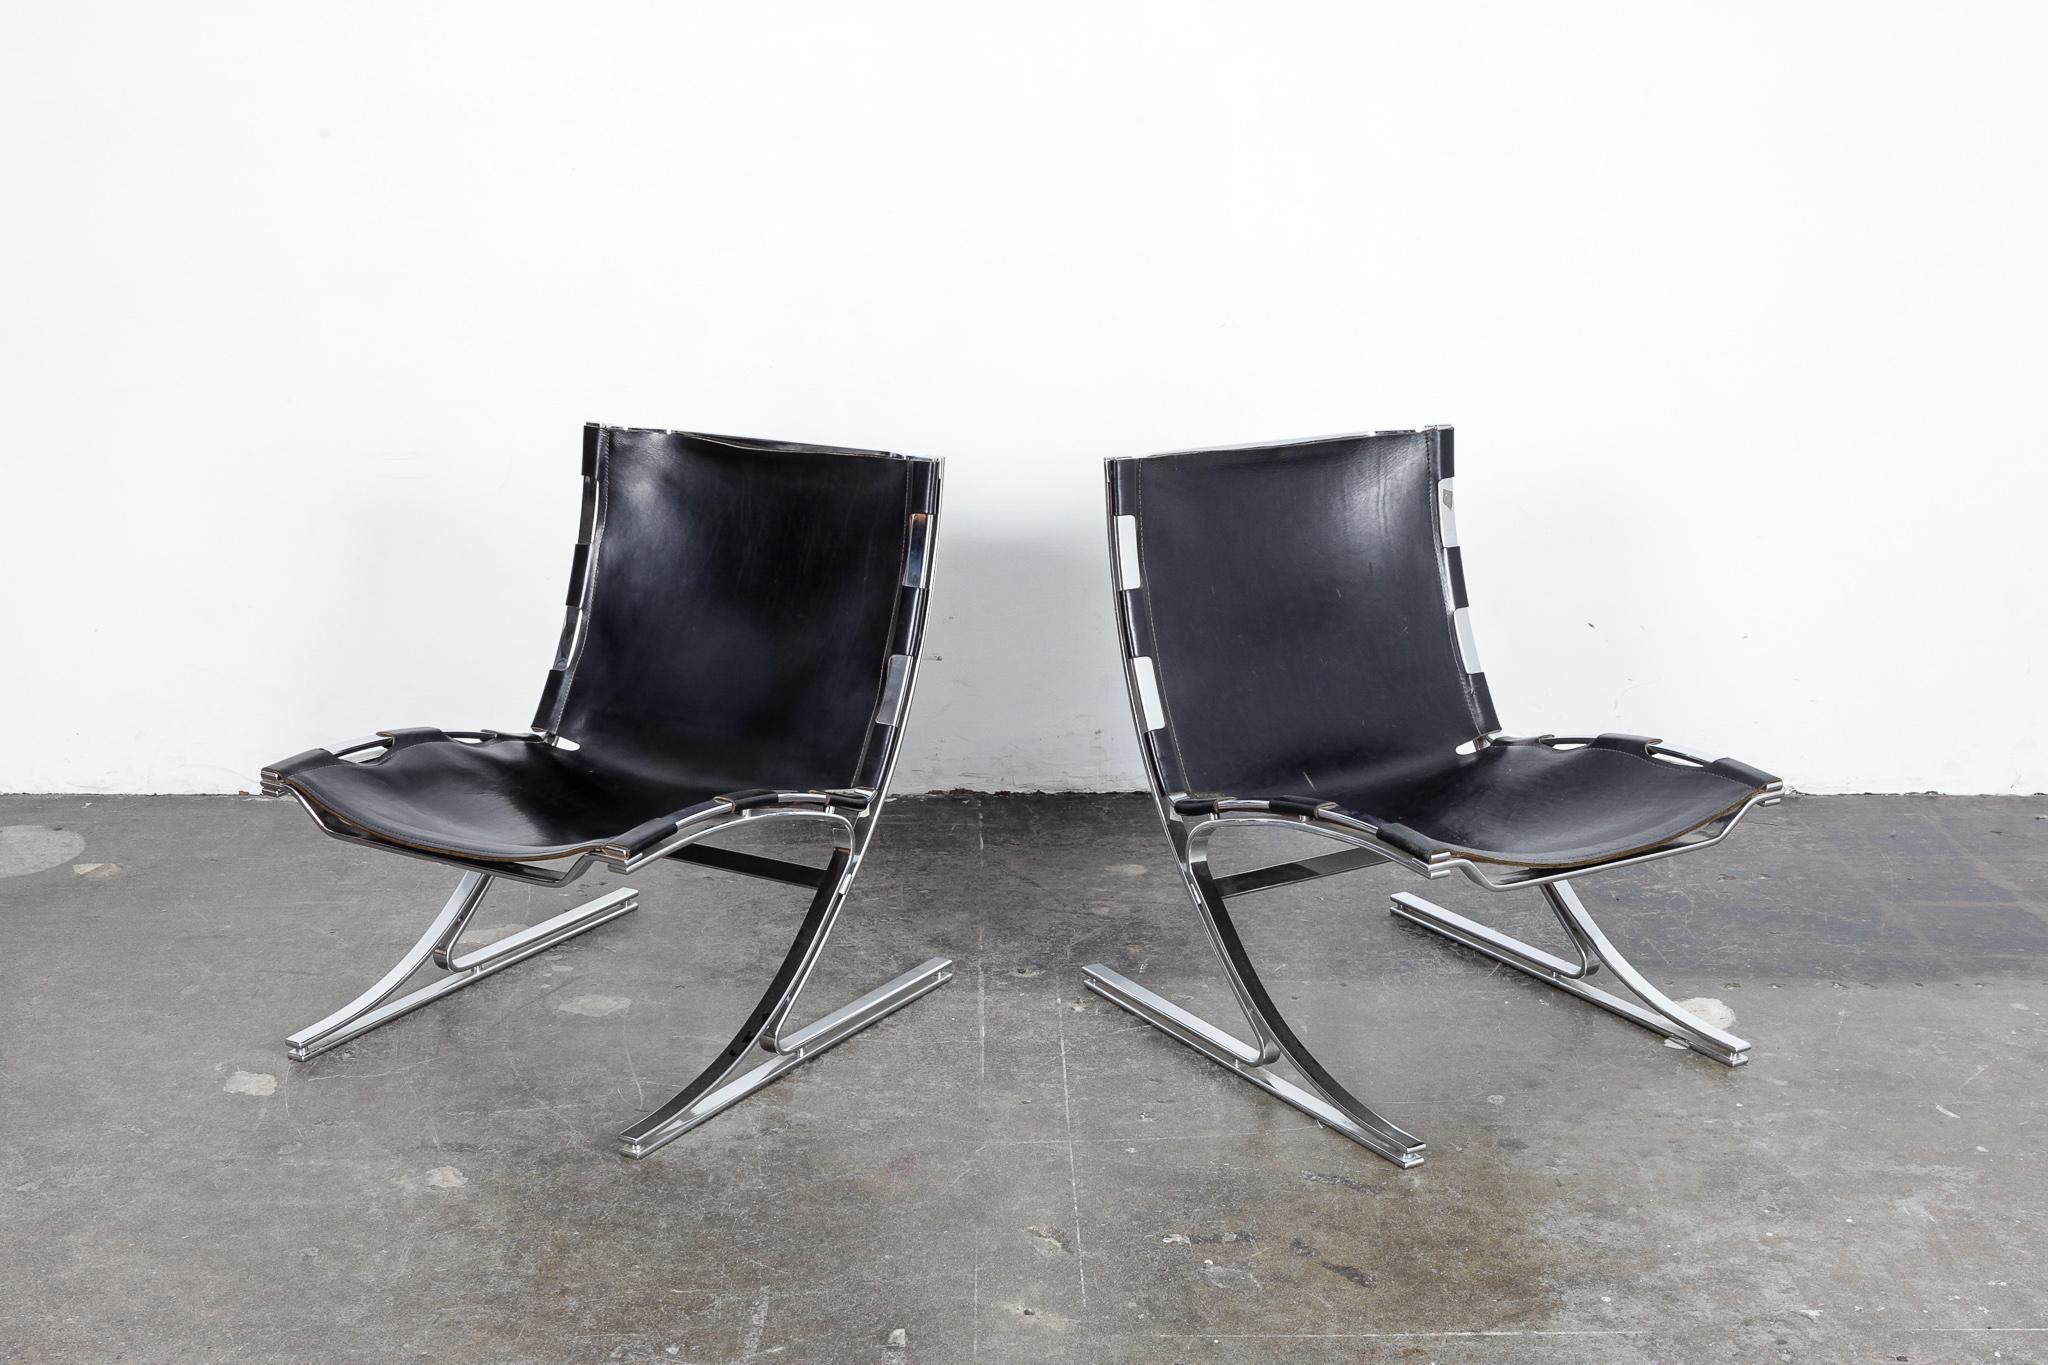 Pair of very rare flat bar metal and original black leather sling chairs designed by Meinhard Von Gerkan, German Architect, in 1972 for the VIP lounge in the Berlin Airport. A total of 48 of these were produced by Walter Knoll. These are from the